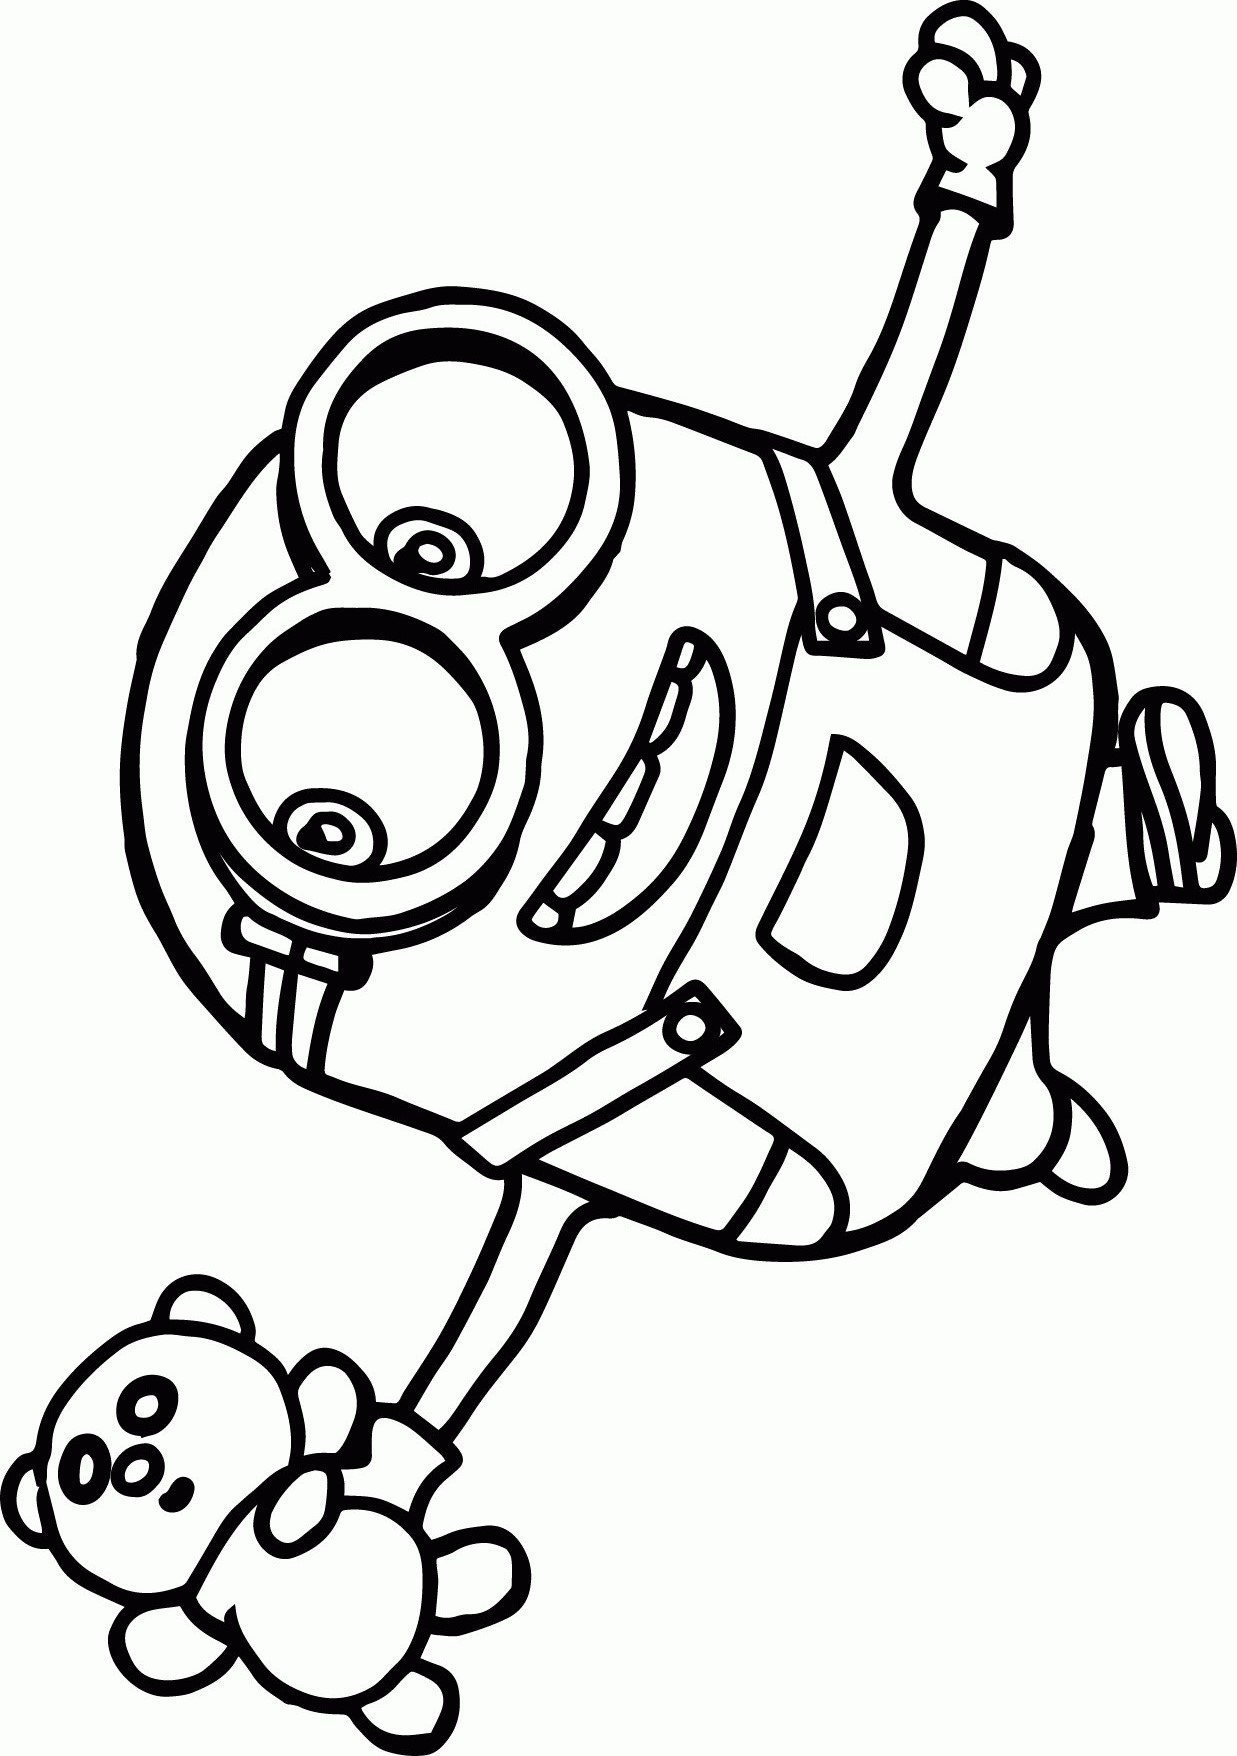 Download Minion Bob With Teddy Coloring Page - Free Printable Coloring Pages for Kids